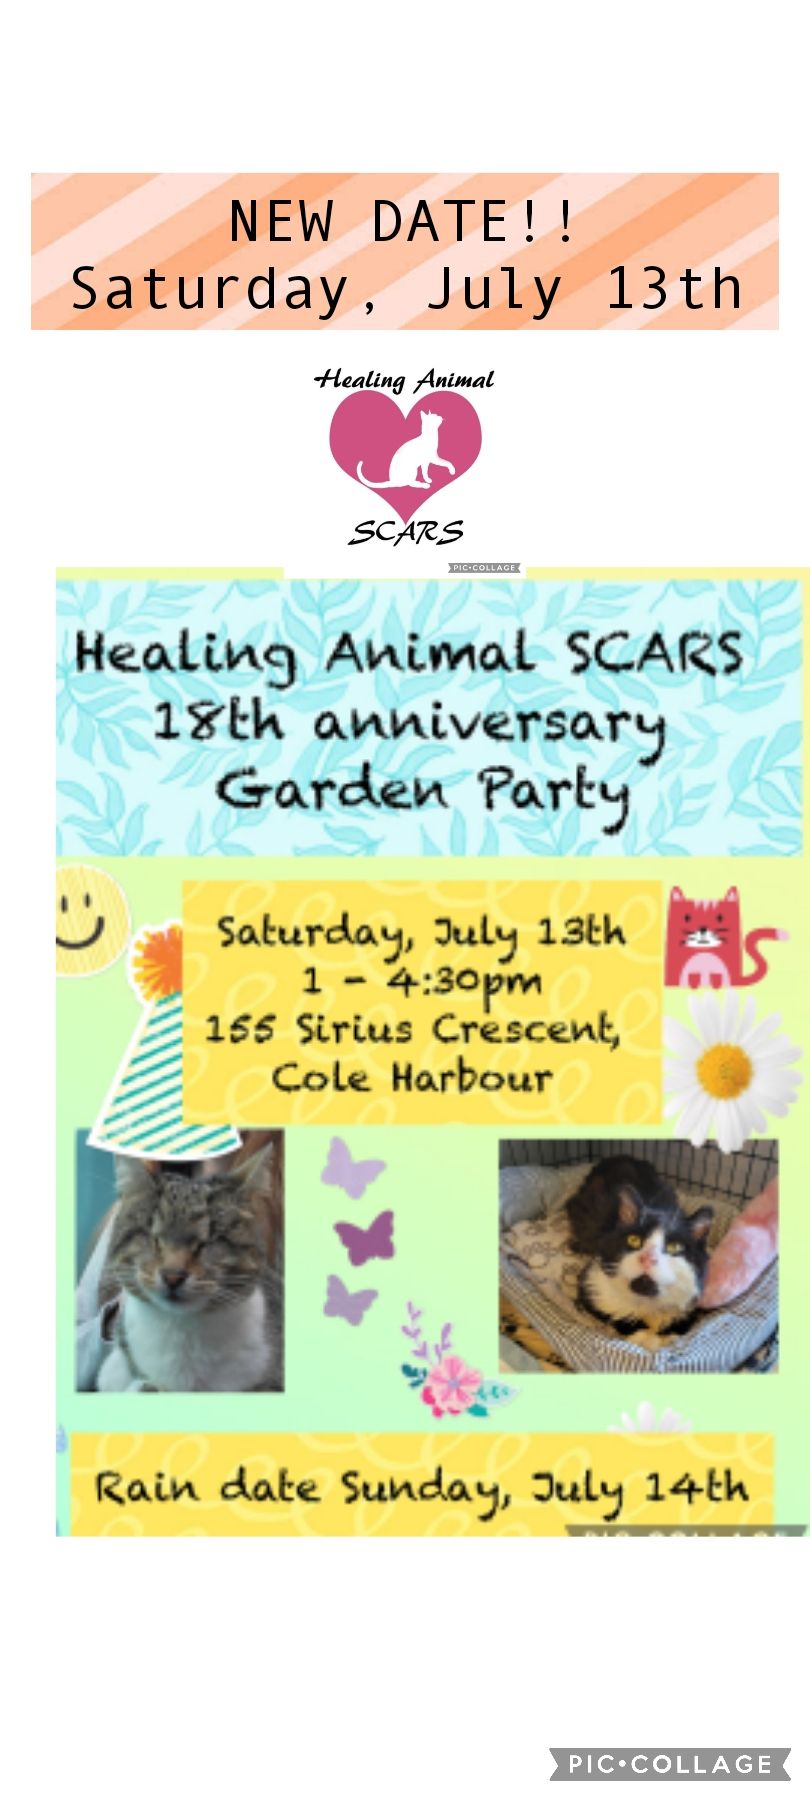 18th Anniversary Garden Paw-rty Fundraiser for Healing Animal SCARS 